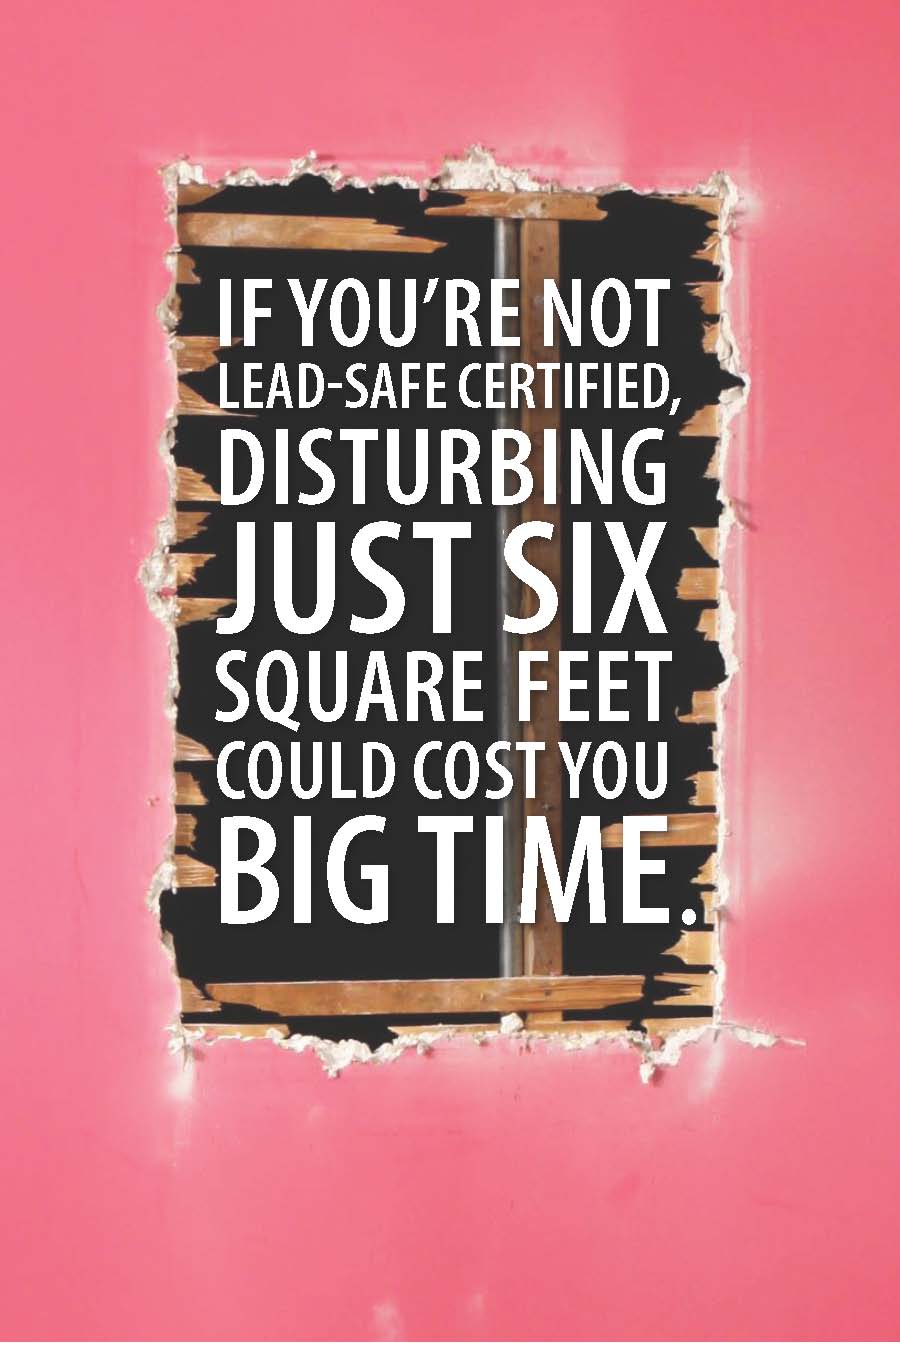  if you're not lead-safe certified disturbing just six square fee could cost you &lt;em&gt;big time&lt;/em&gt;.